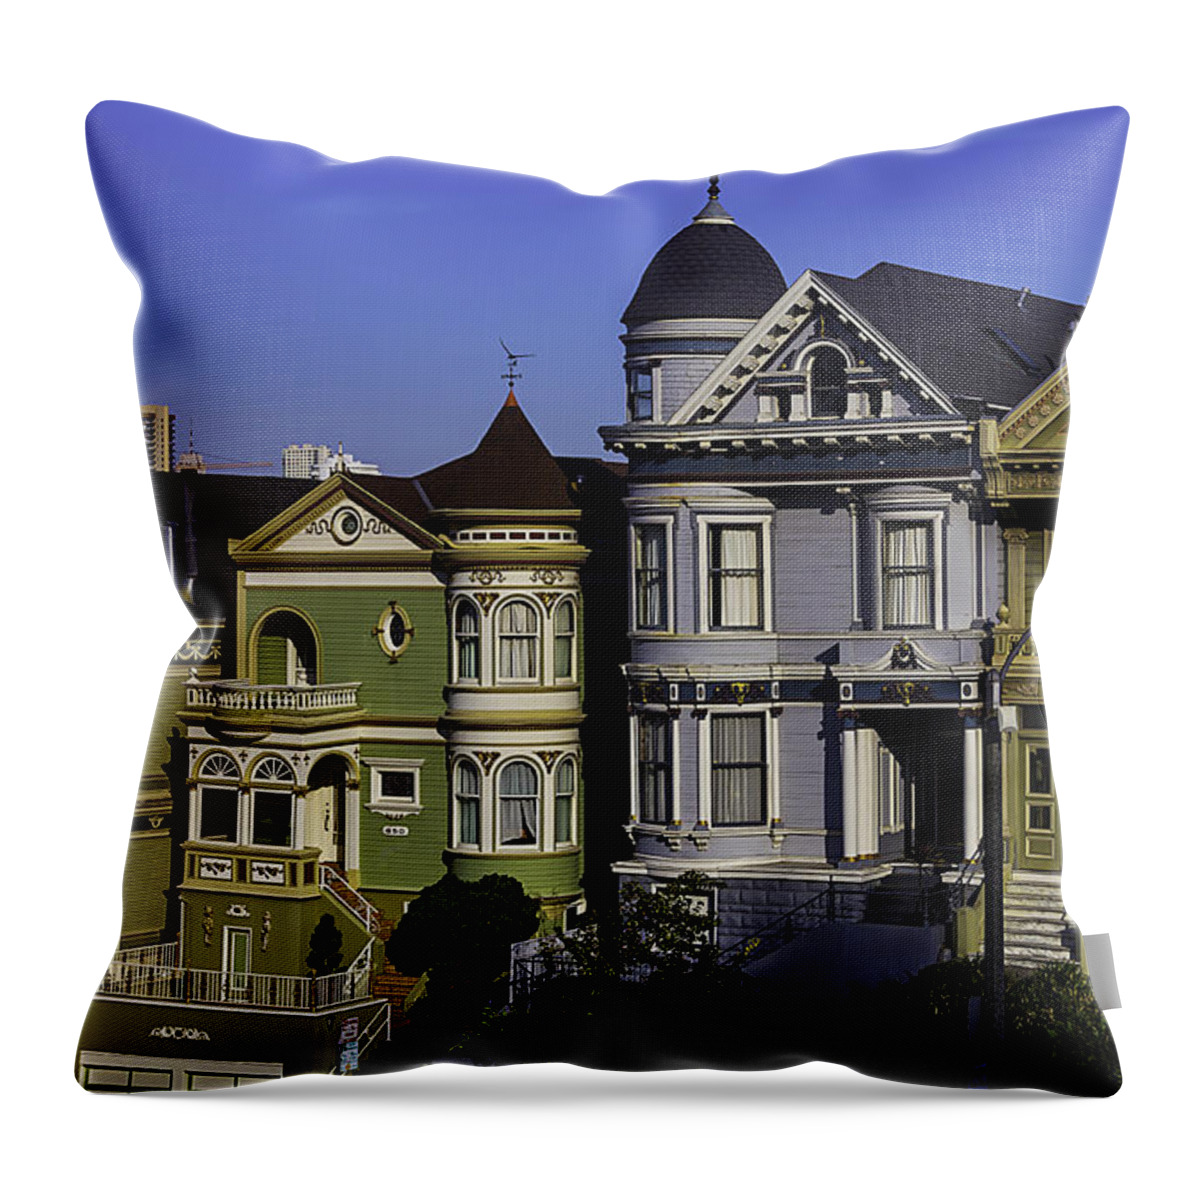 Victorian Throw Pillow featuring the photograph Landmark Houses by Garry Gay